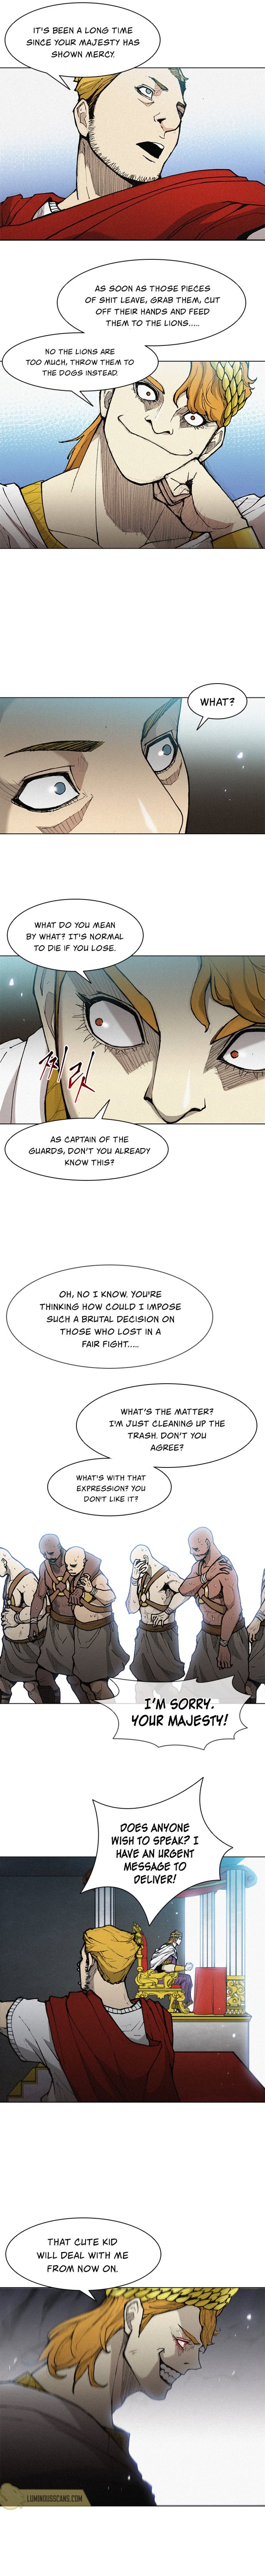 long-way-of-the-warrior-chap-21-5